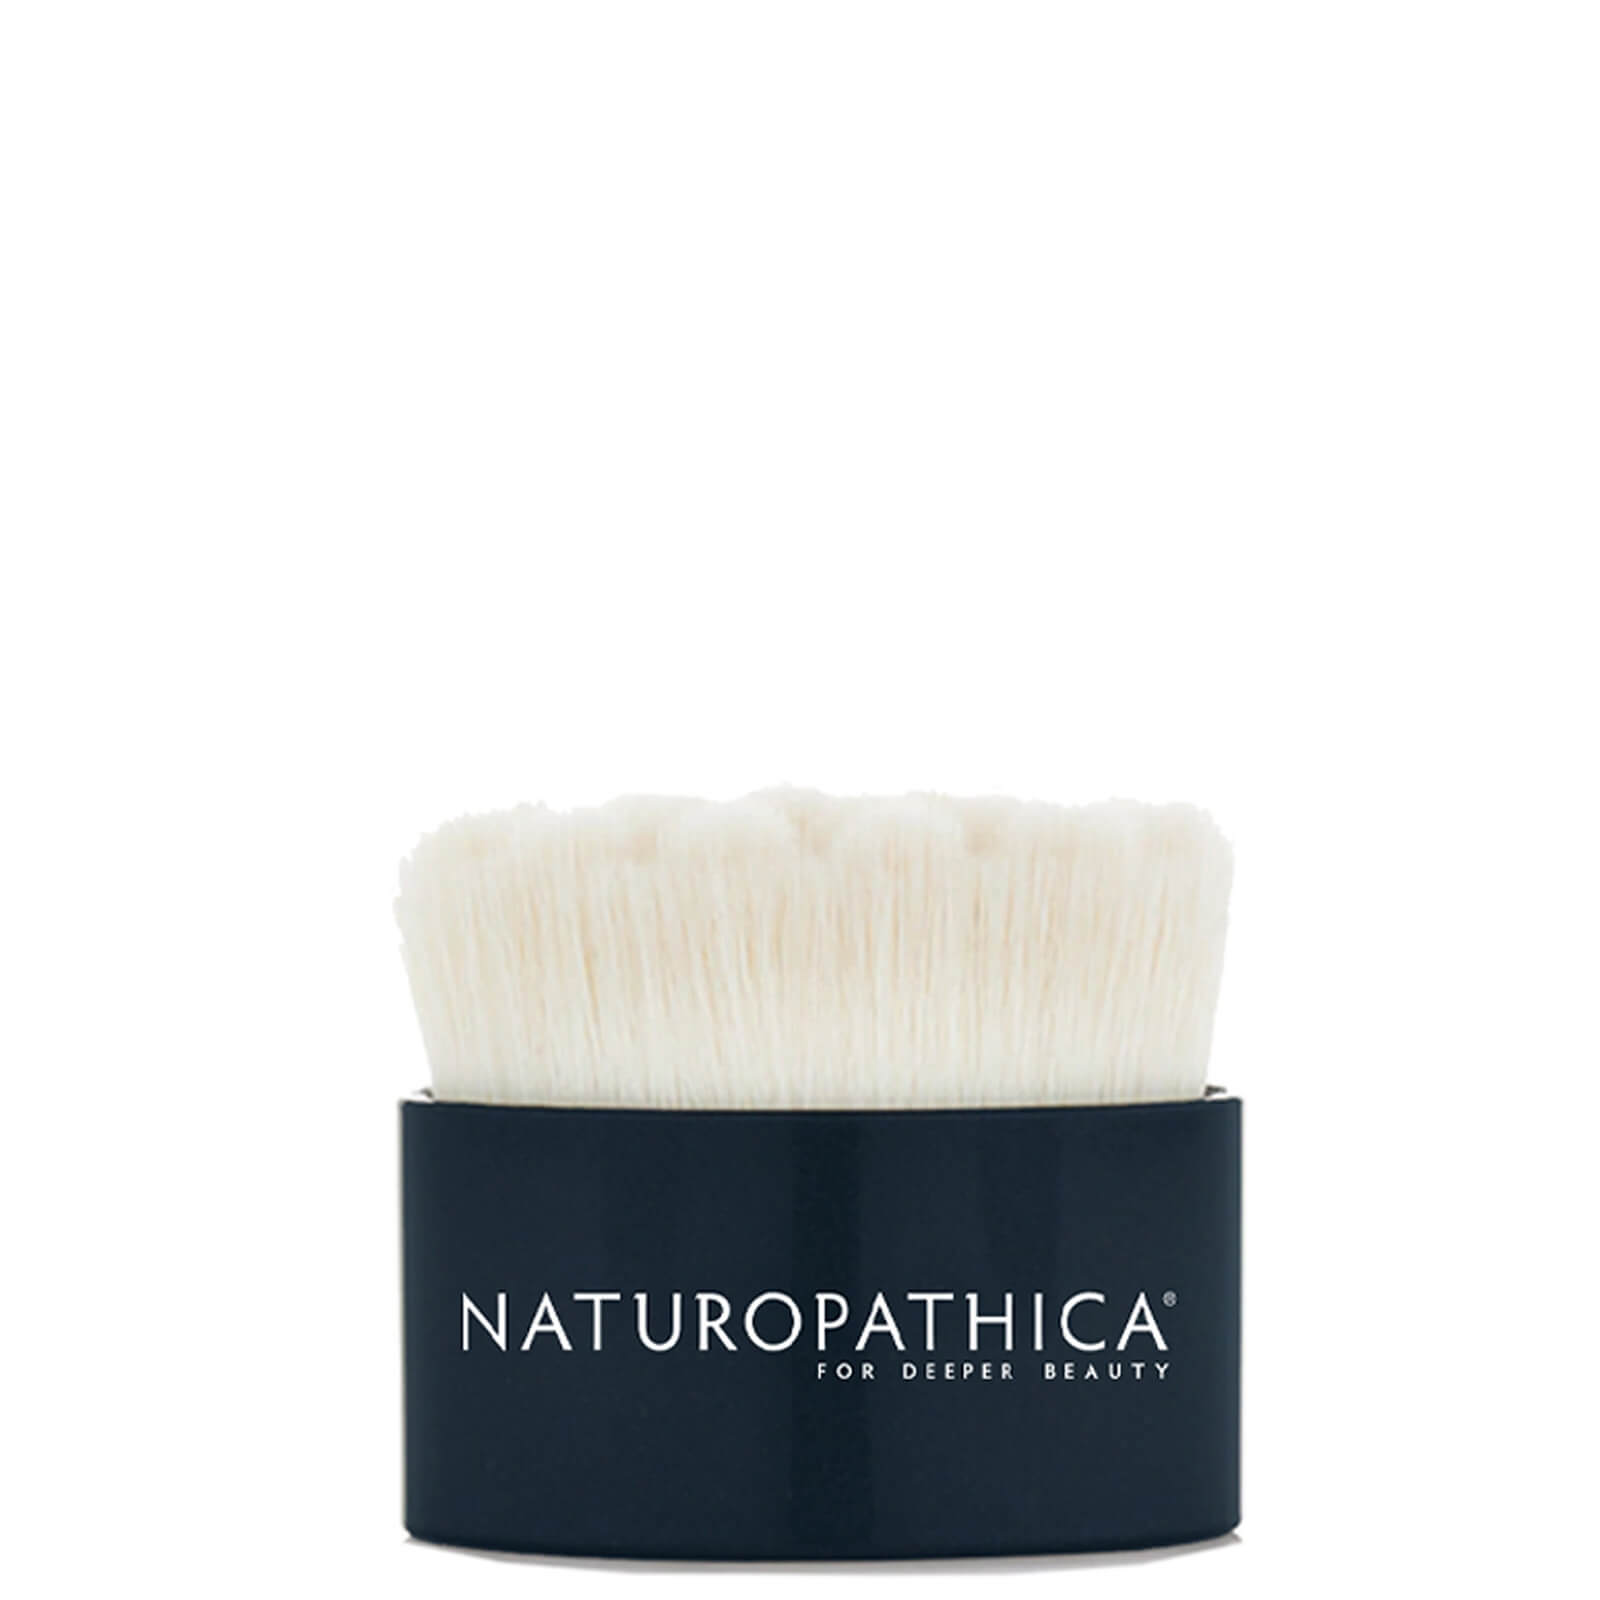 Naturopathica Facial Cleansing Brush (1 count)